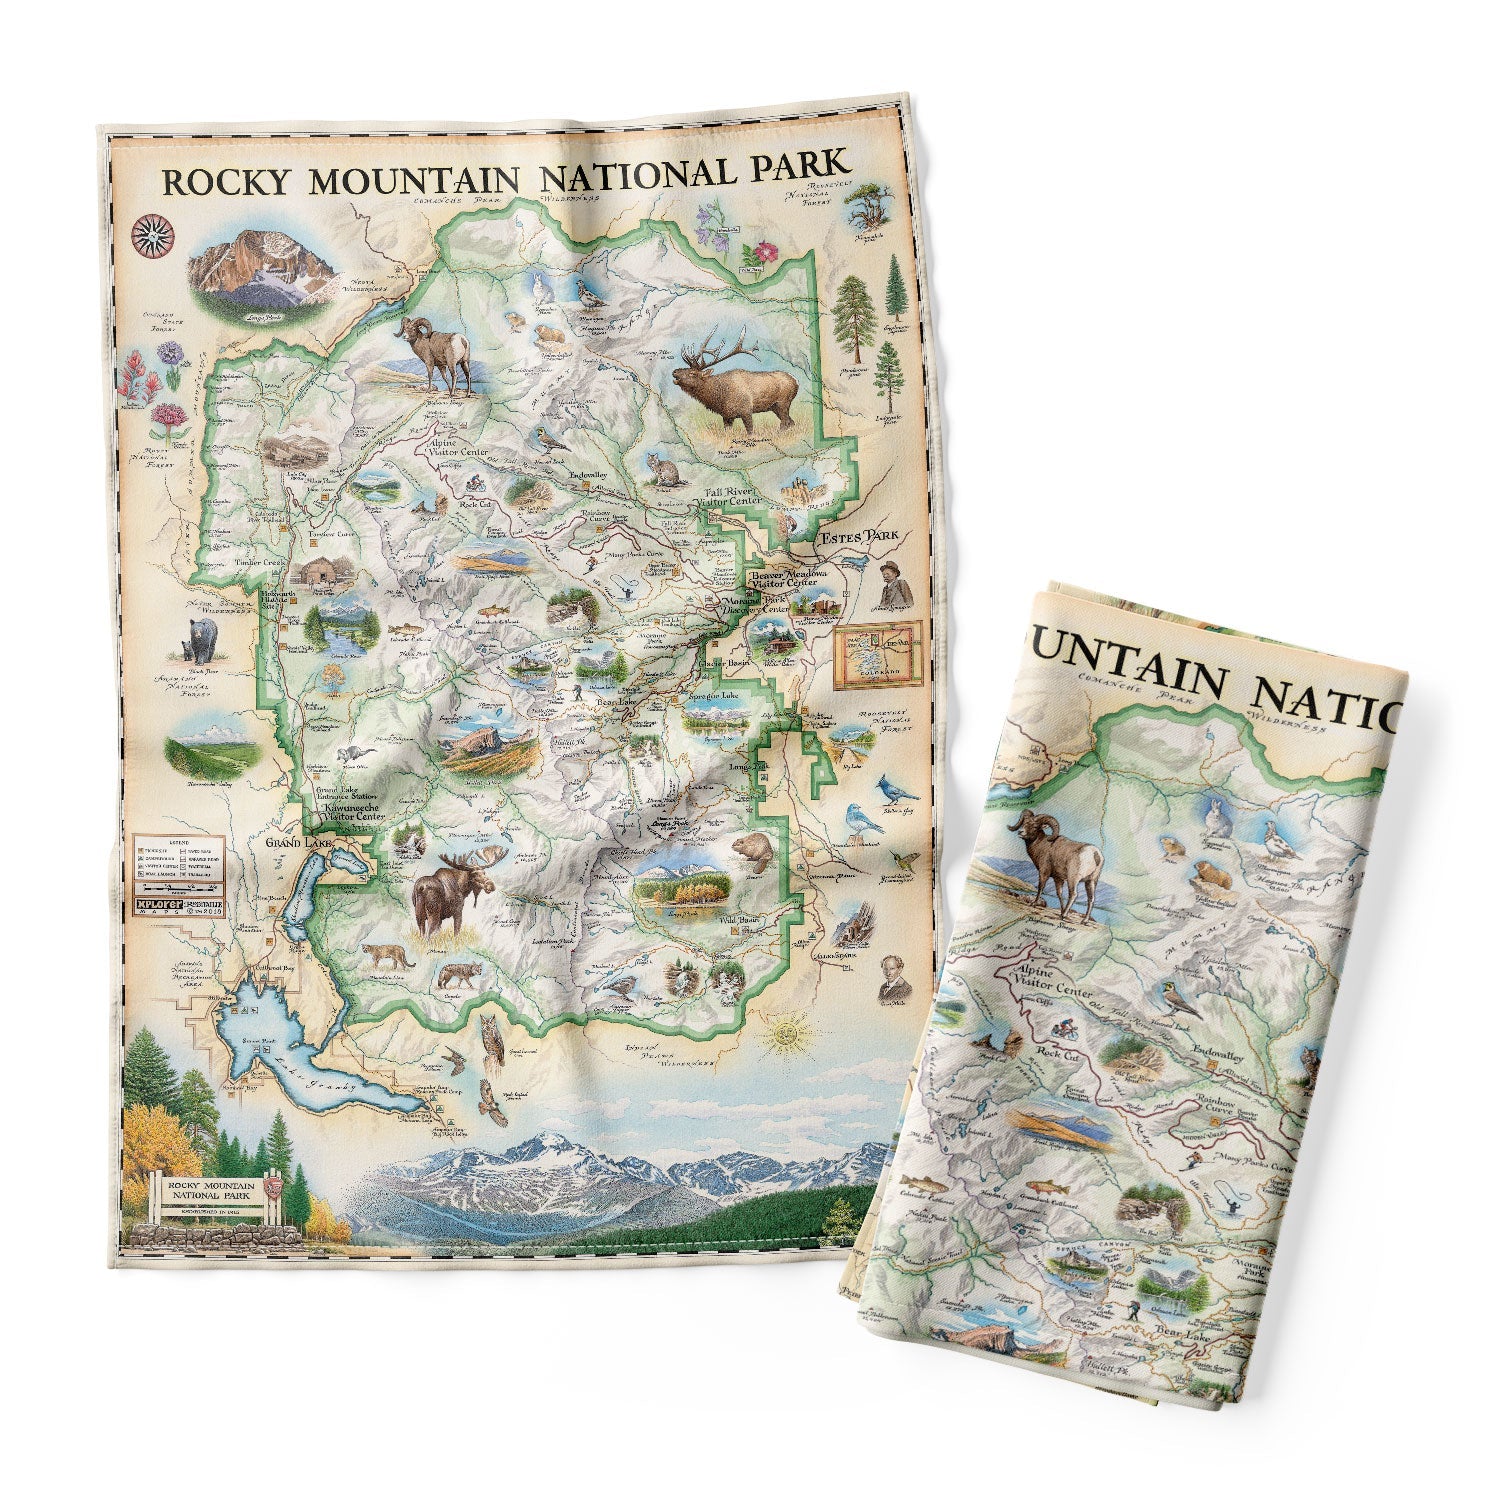 Rocky Mountain National Park Map Kitchen Dishwashing Towel in earth tones, green, yellow, and beige. Features illustrations of places like Trail Ridge Road, Mount Ganby, Estes Park, and the Alpine Visitor Center. Include bobcats, snowshoe hares, Indian paintbrushes, and wild roses. 